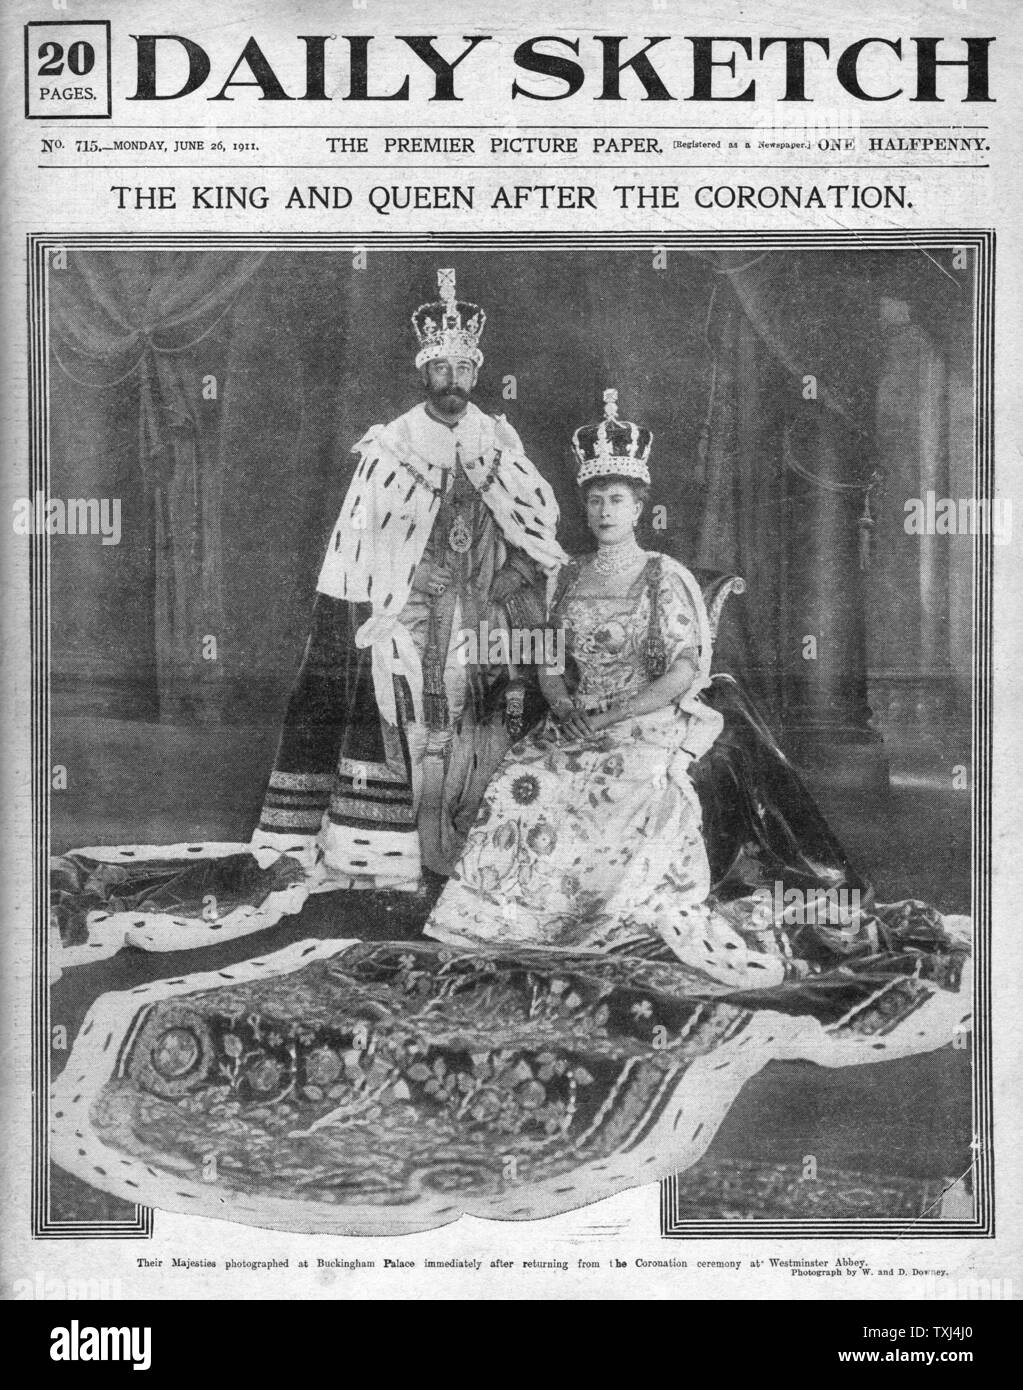 1911 Daily Sketch front page Coronation of King George V & Queen Mary Stock Photo